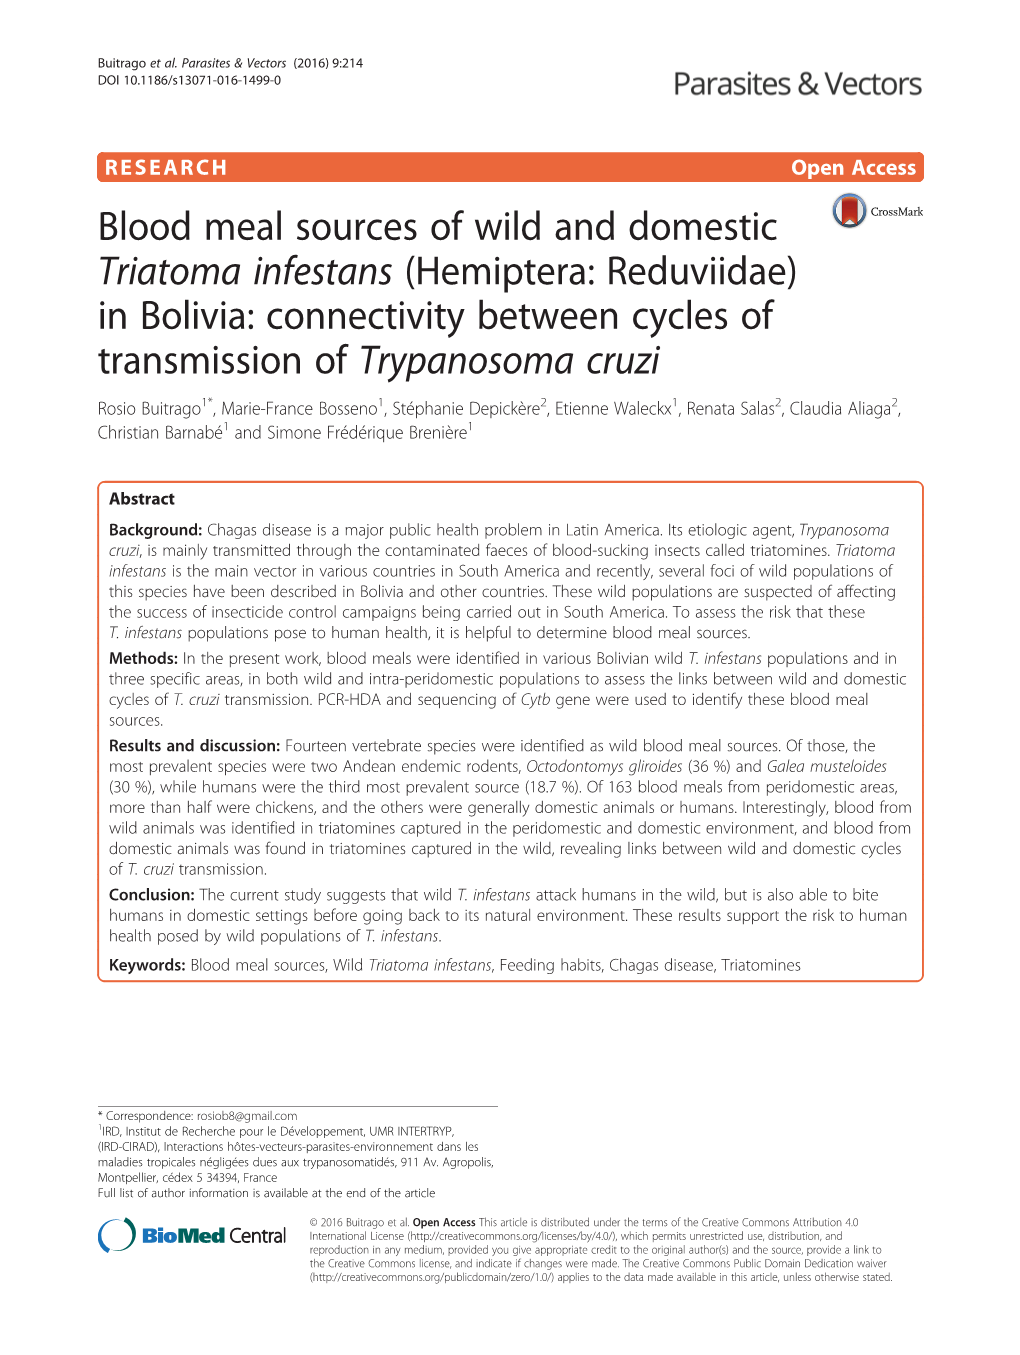 Blood Meal Sources of Wild and Domestic Triatoma Infestans